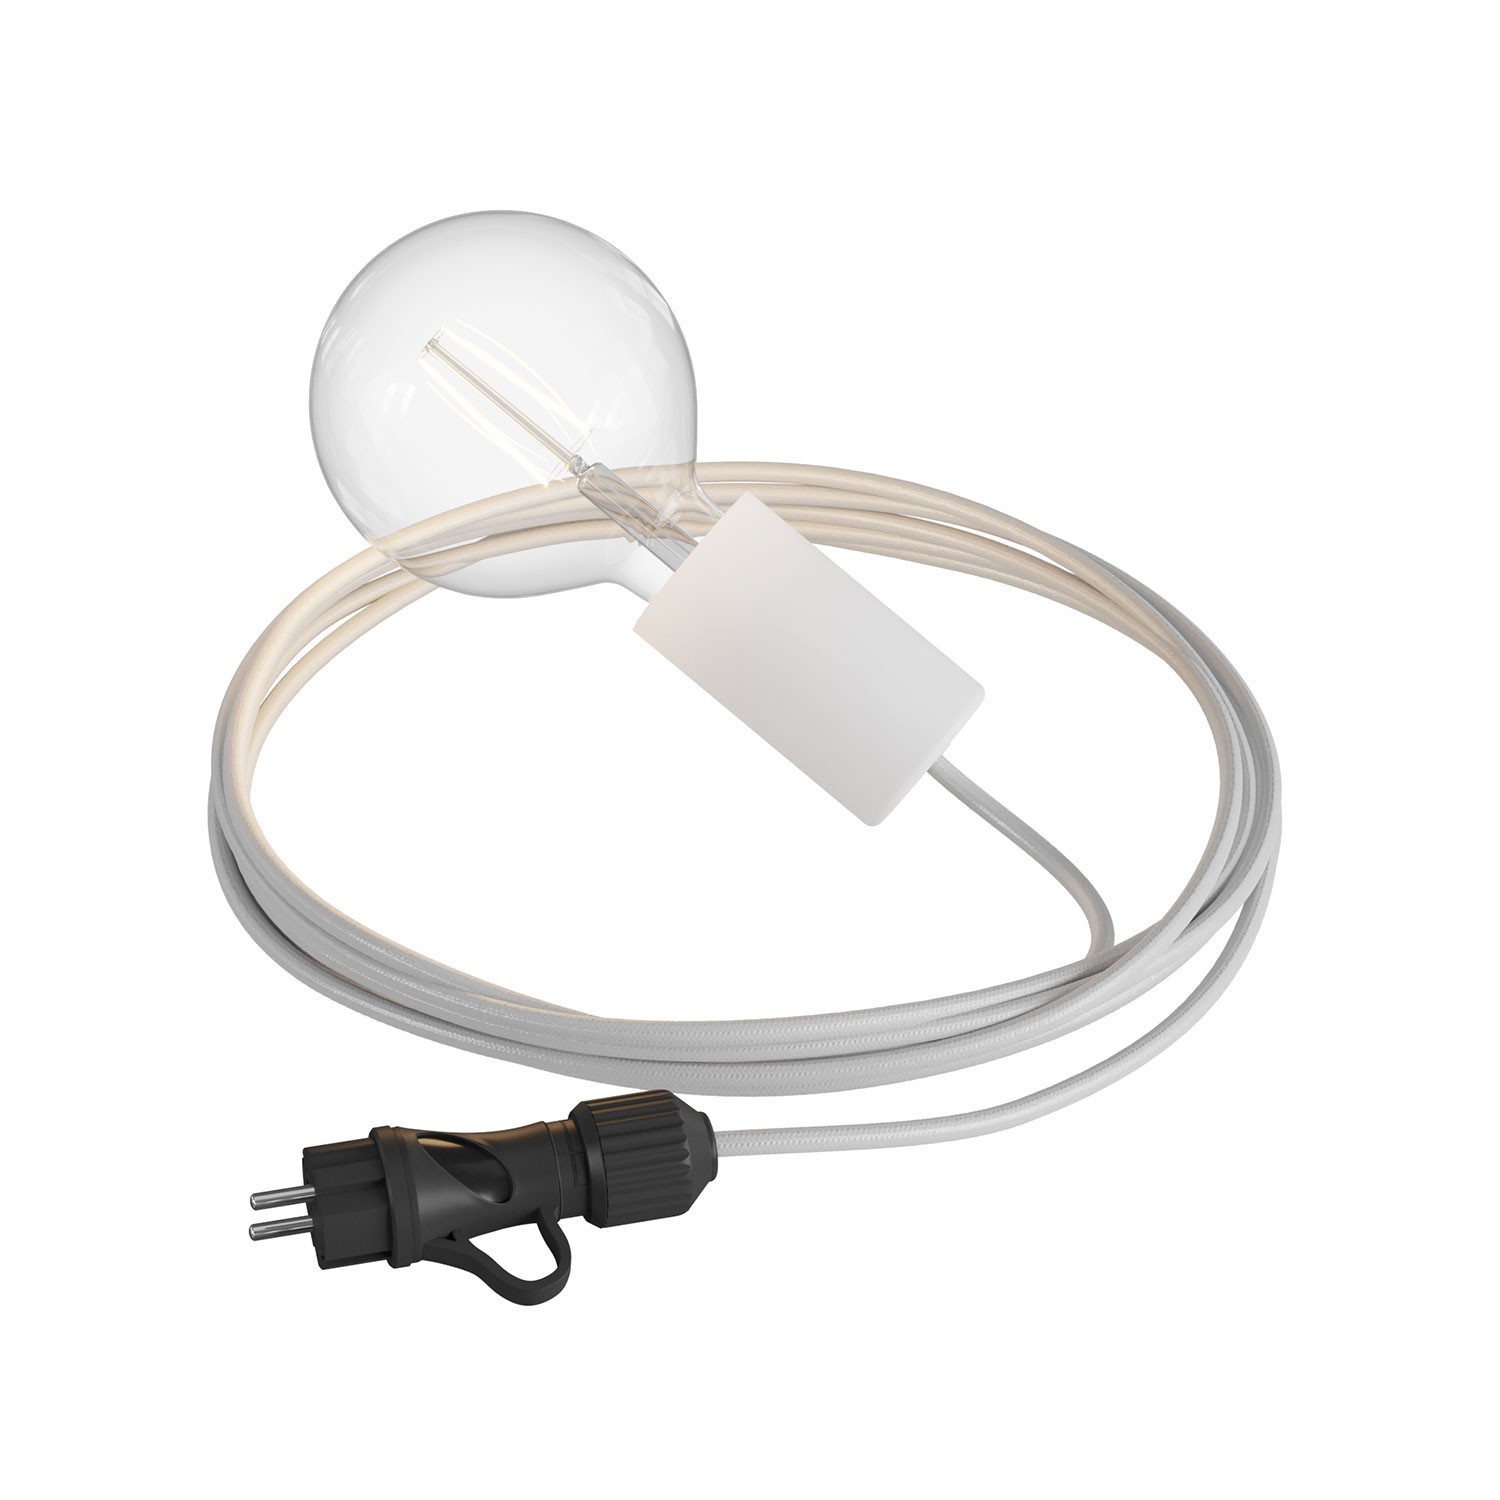 Eiva Snake Elegant, portable outdoor lamp, 5 m fabric cable, IP65 waterproof lamp holder and plug